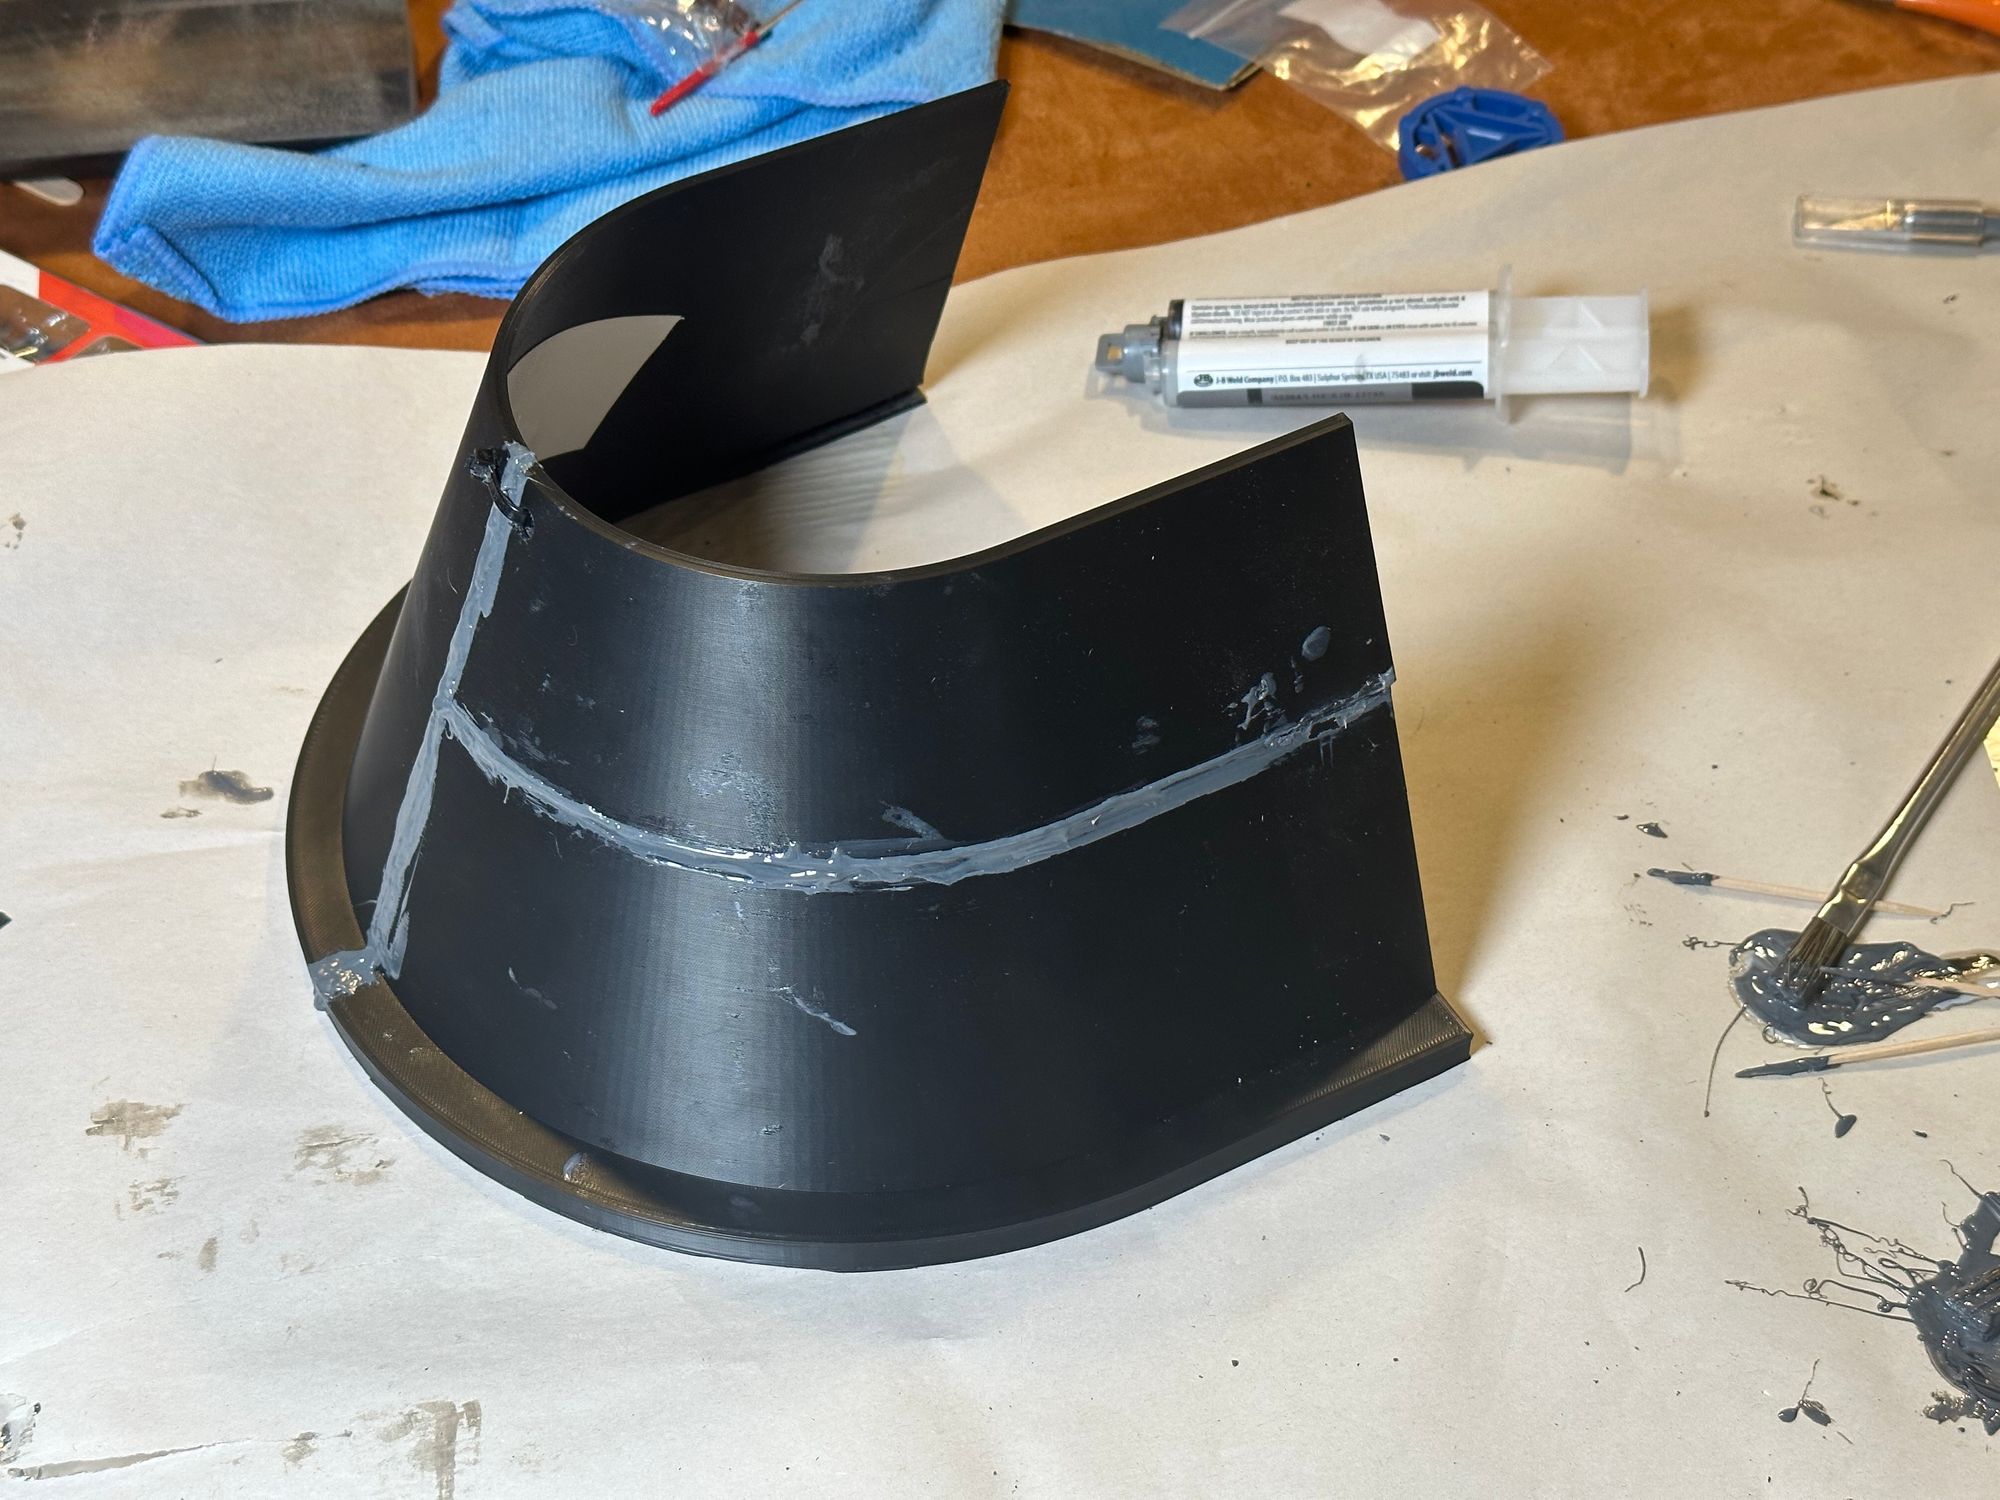 Both pieces of the hood, epoxied together. The gray epoxy is very noticeable, both down the center seam, and along a horizontal seam where one piece split. A zip tie secures the end pieces of the hood together, and some white Gorilla tape is visible on the underside. Leftover epoxy and disposable tools sit nearby.